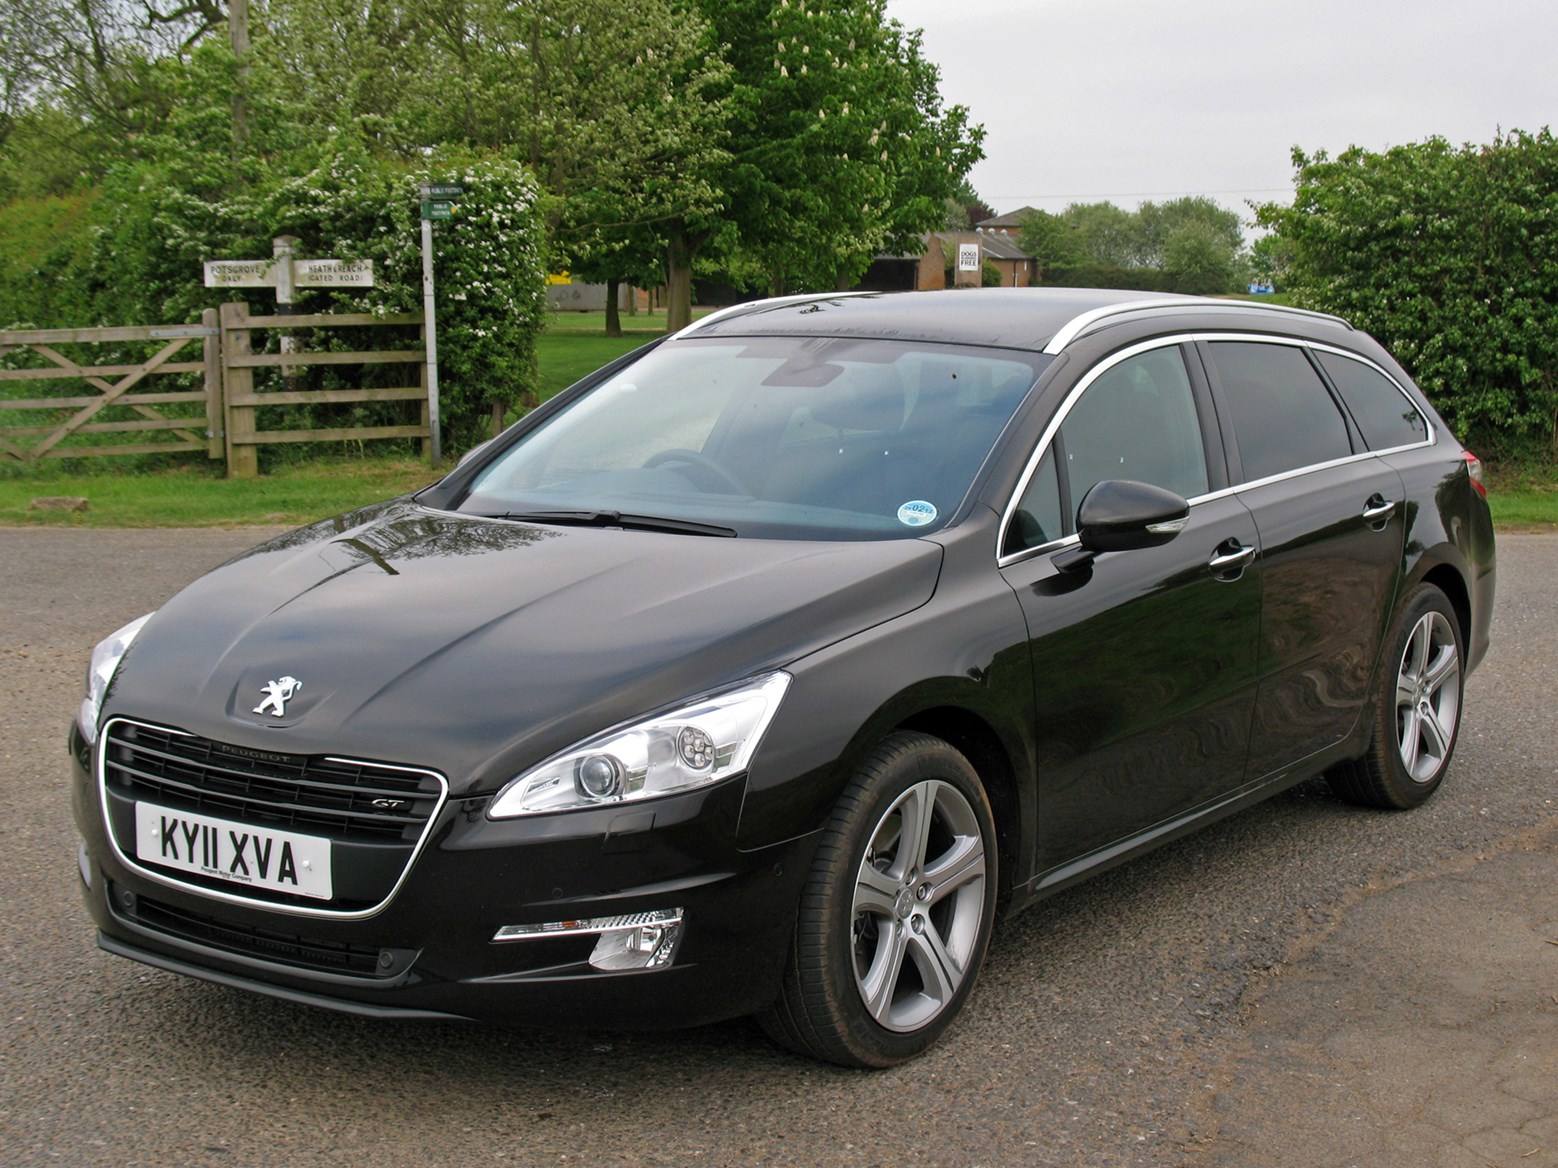 Peugeot 508 review						Overview						Currently reading